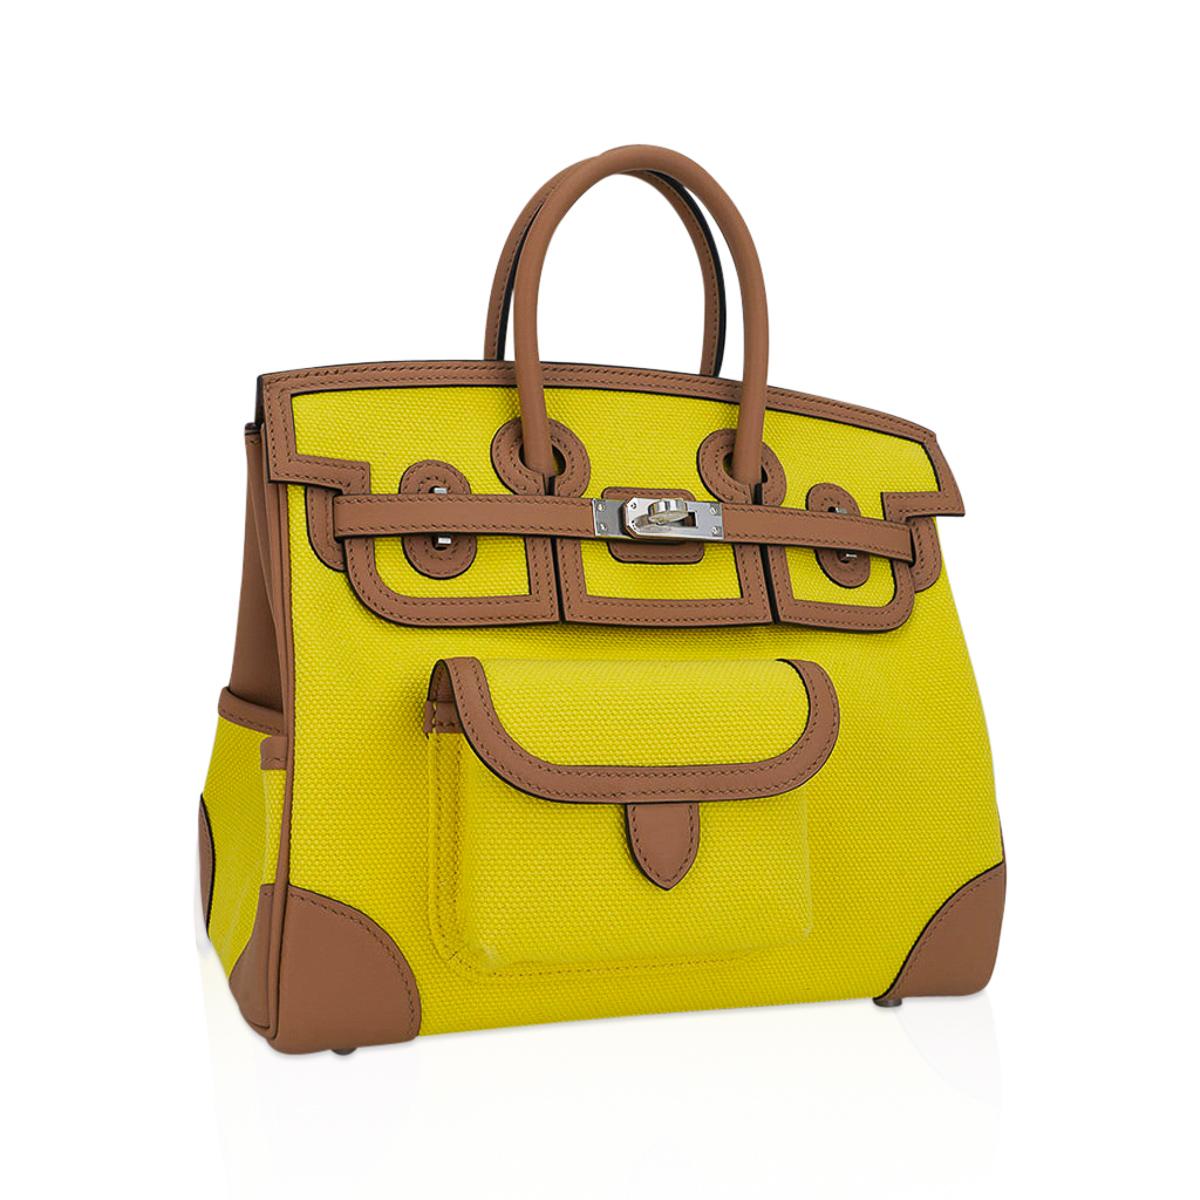 Mightychic offers an Hermes Cargo Birkin 25 bag featured in Jaune Citron and Chai.
This Hermes very limited edition utility Birkin bag is created with Goeland canvas and Swift leather trim.
Includes front and rear snap pockets, exterior credit card